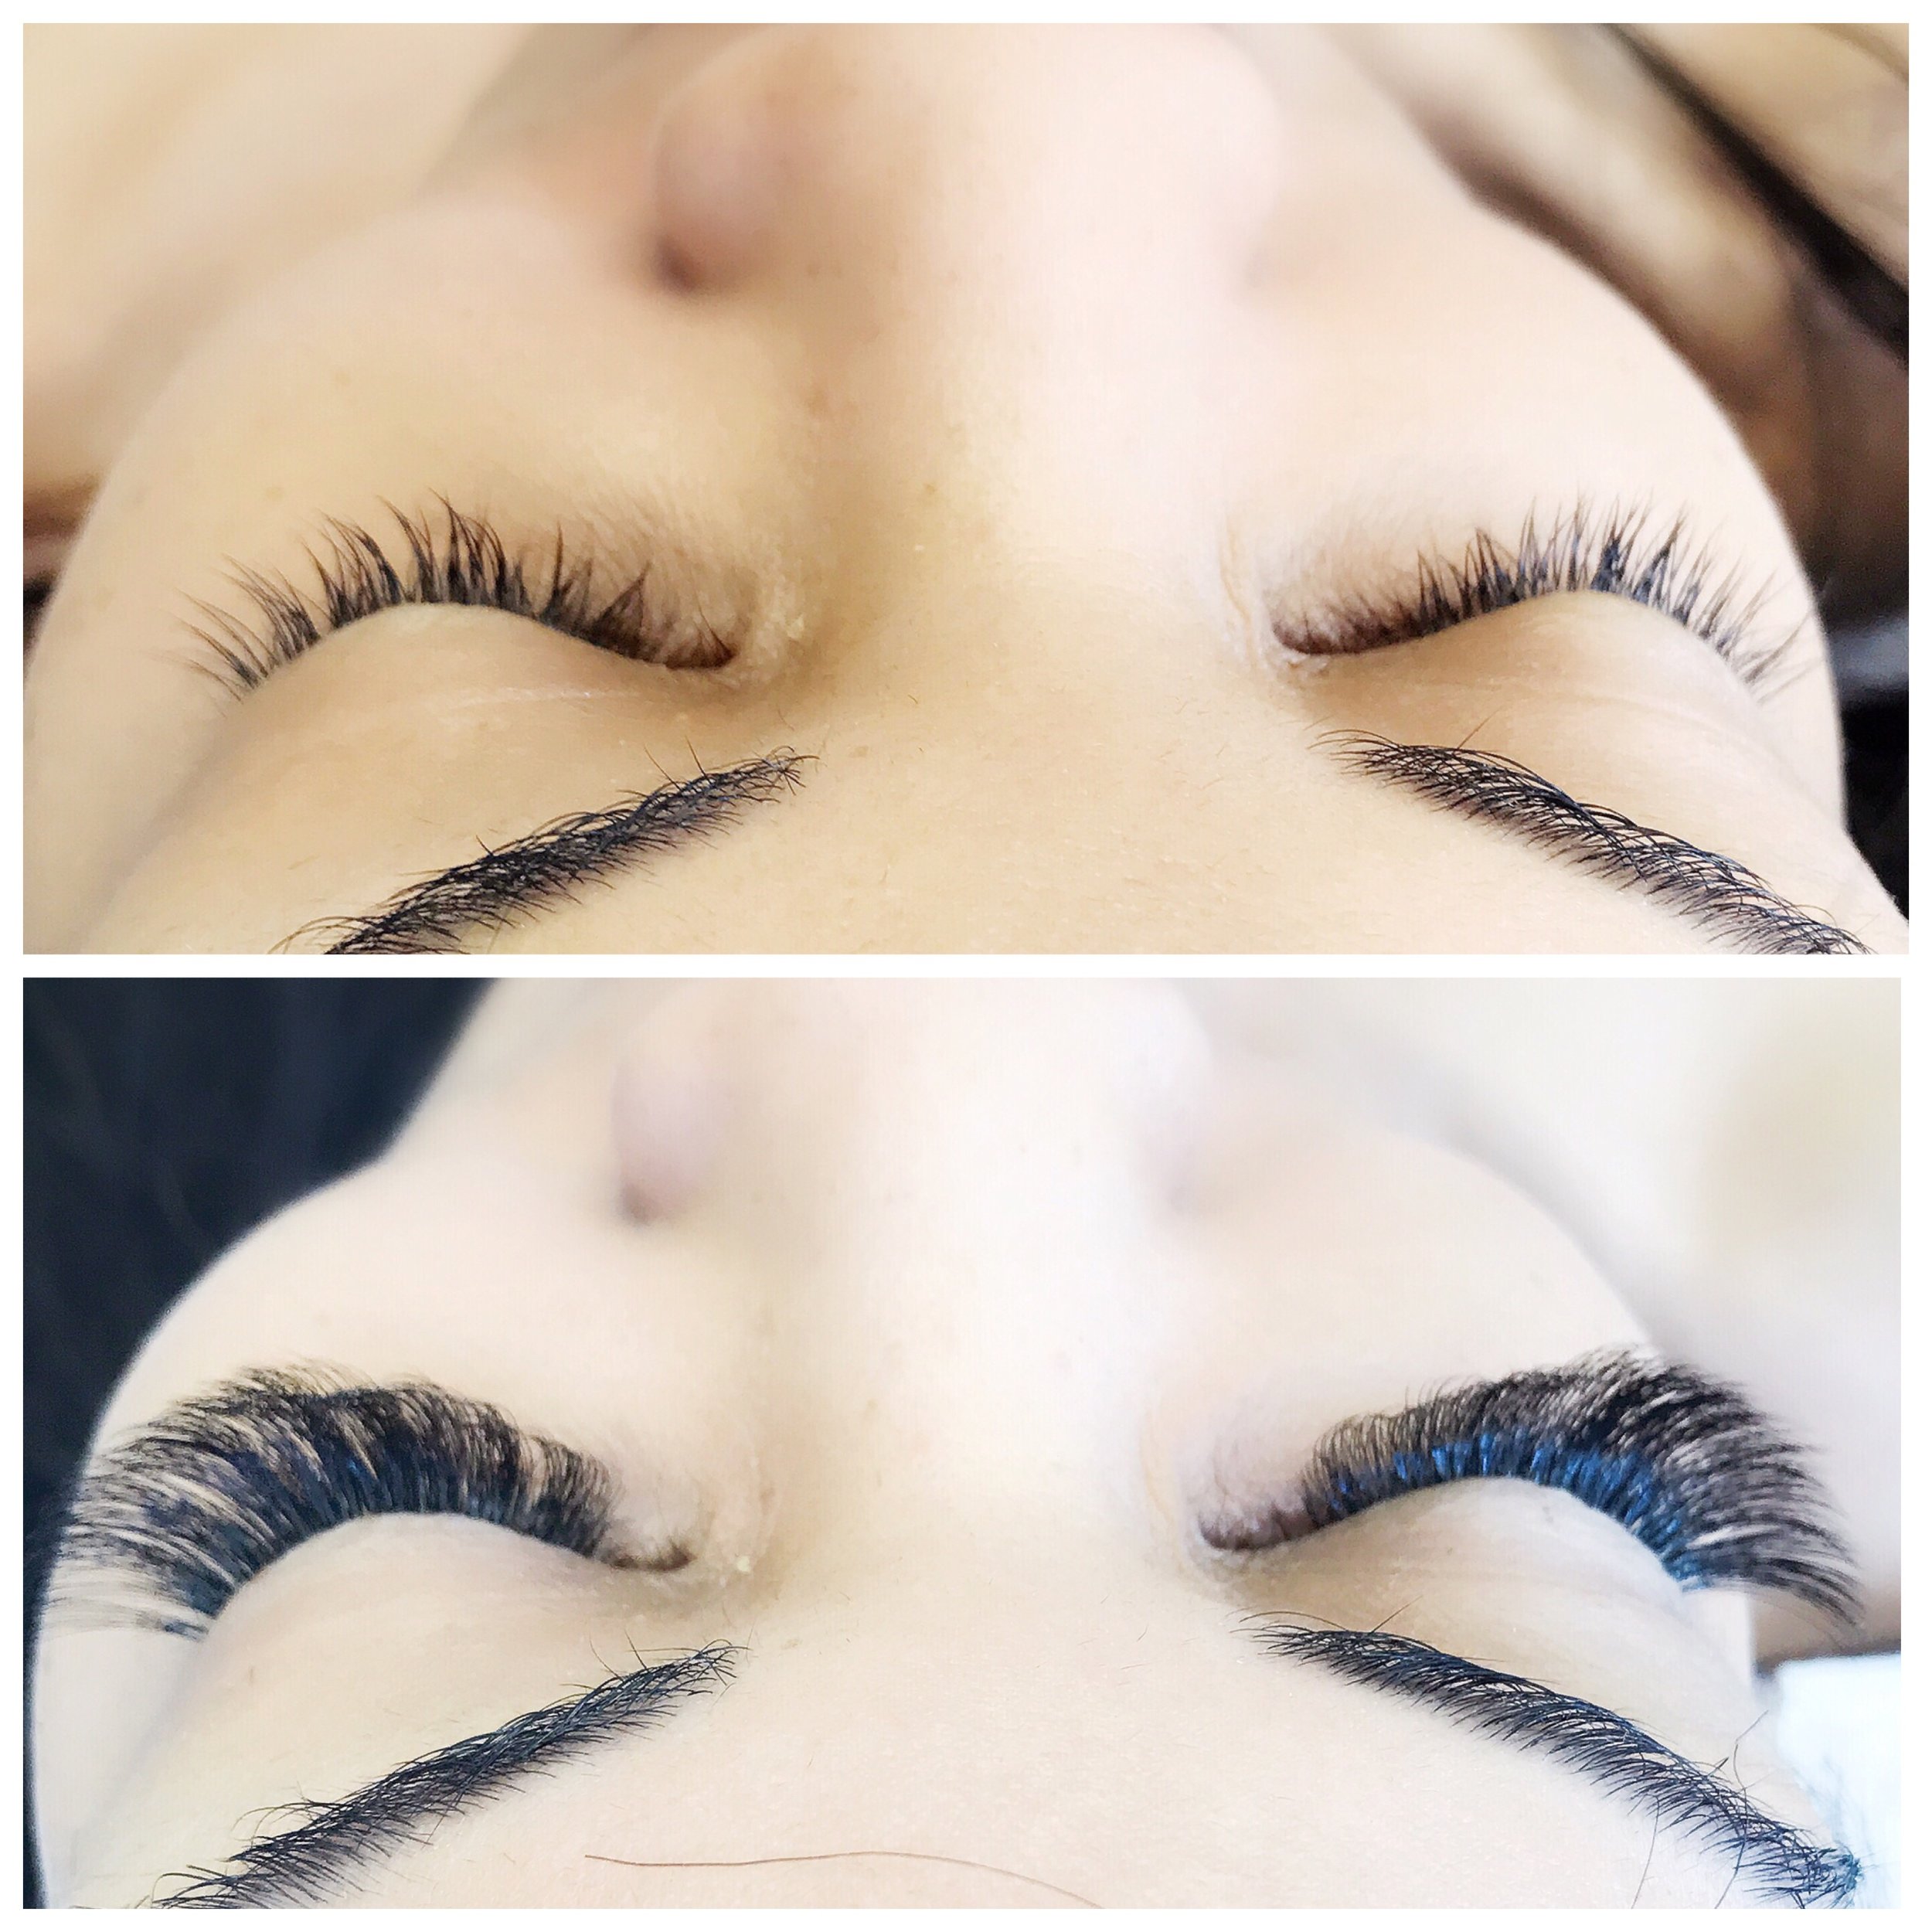 Volume Lashes before and after